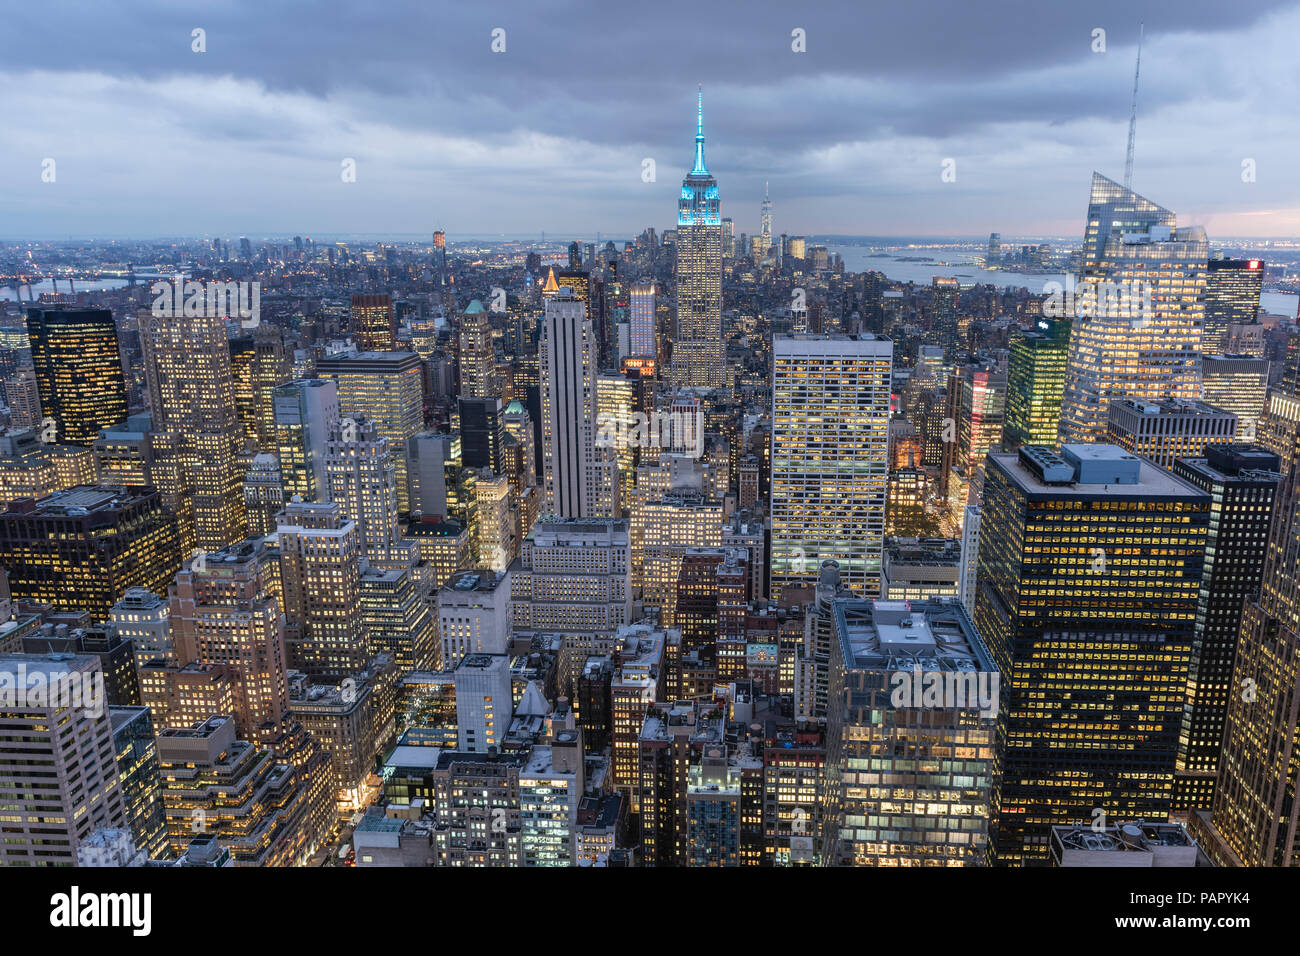 USA, New York City, Manhattan, cityscape as seen from Top of the Rock observation platform Stock Photo